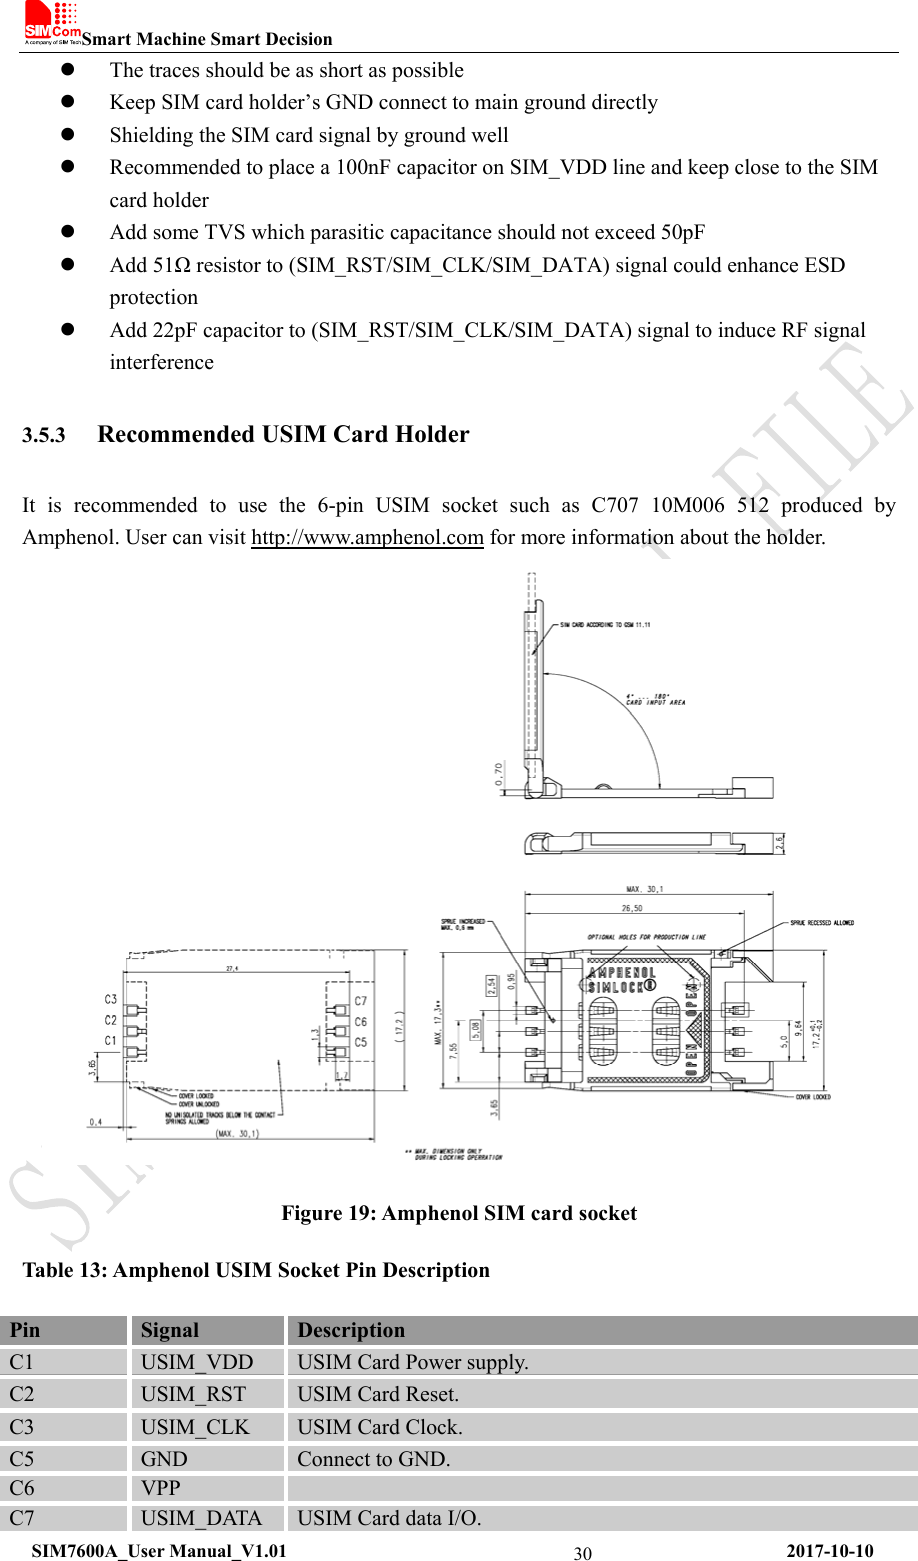 Smart Machine Smart Decision  SIM7600A_User Manual_V1.01                                                     2017-10-10 30 The traces should be as short as possible  Keep SIM card holder’s GND connect to main ground directly  Shielding the SIM card signal by ground well    Recommended to place a 100nF capacitor on SIM_VDD line and keep close to the SIM card holder  Add some TVS which parasitic capacitance should not exceed 50pF  Add 51Ω resistor to (SIM_RST/SIM_CLK/SIM_DATA) signal could enhance ESD protection  Add 22pF capacitor to (SIM_RST/SIM_CLK/SIM_DATA) signal to induce RF signal interference  3.5.3 Recommended USIM Card Holder It is recommended to use the 6-pin USIM socket such as C707 10M006 512 produced by Amphenol. User can visit http://www.amphenol.com for more information about the holder.  Figure 19: Amphenol SIM card socket Table 13: Amphenol USIM Socket Pin Description Pin  Signal  Description C1  USIM_VDD  USIM Card Power supply. C2  USIM_RST  USIM Card Reset. C3  USIM_CLK  USIM Card Clock. C5  GND  Connect to GND. C6  VPP   C7  USIM_DATA  USIM Card data I/O. 